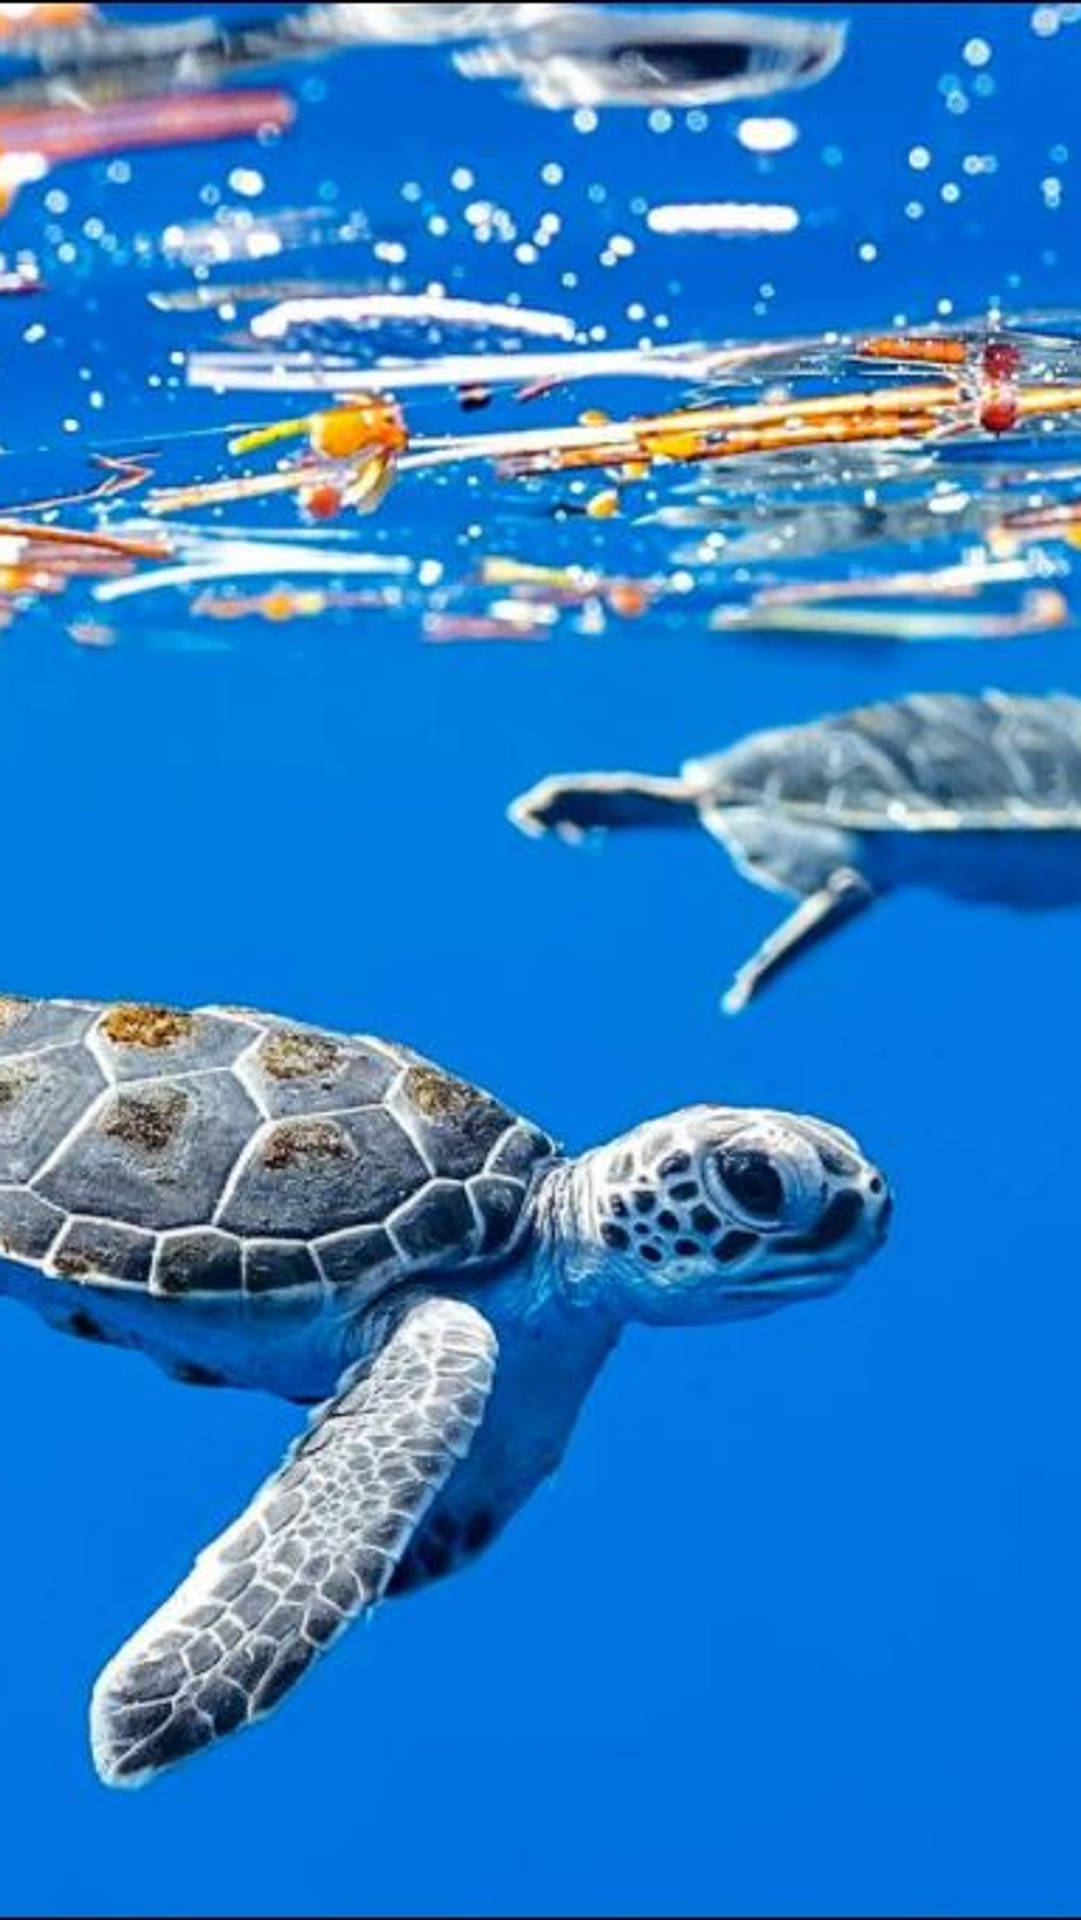 Two Turtles Swimming In The Ocean With Plastic Bags Wallpaper